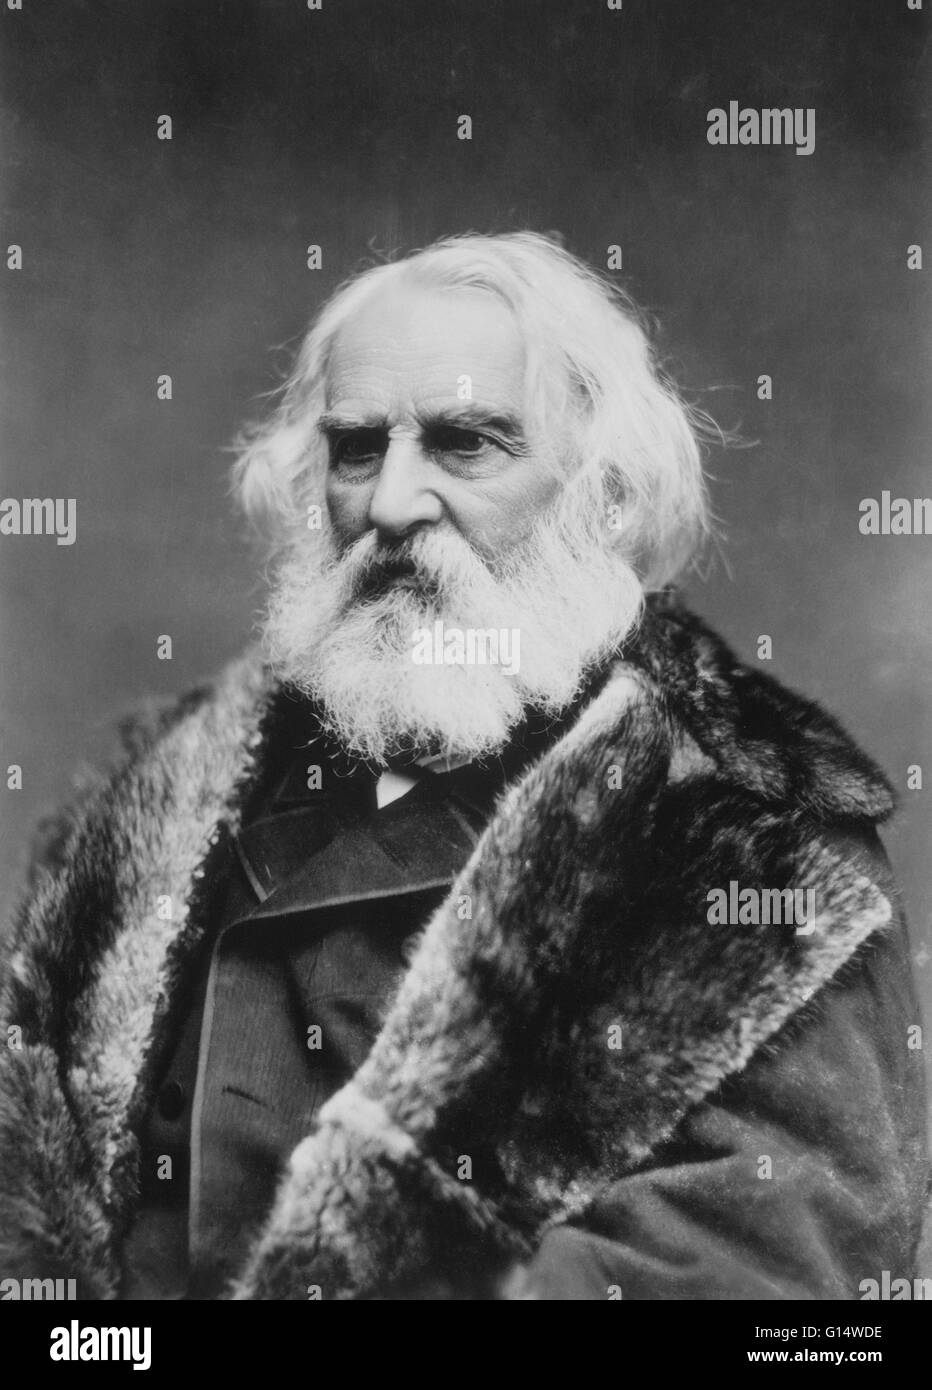 Portrait of the American poet Henry Wadsworth Longfellow (February 27, 1807 - March 24, 1882), author of 'Paul Revere's Ride.' Stock Photo